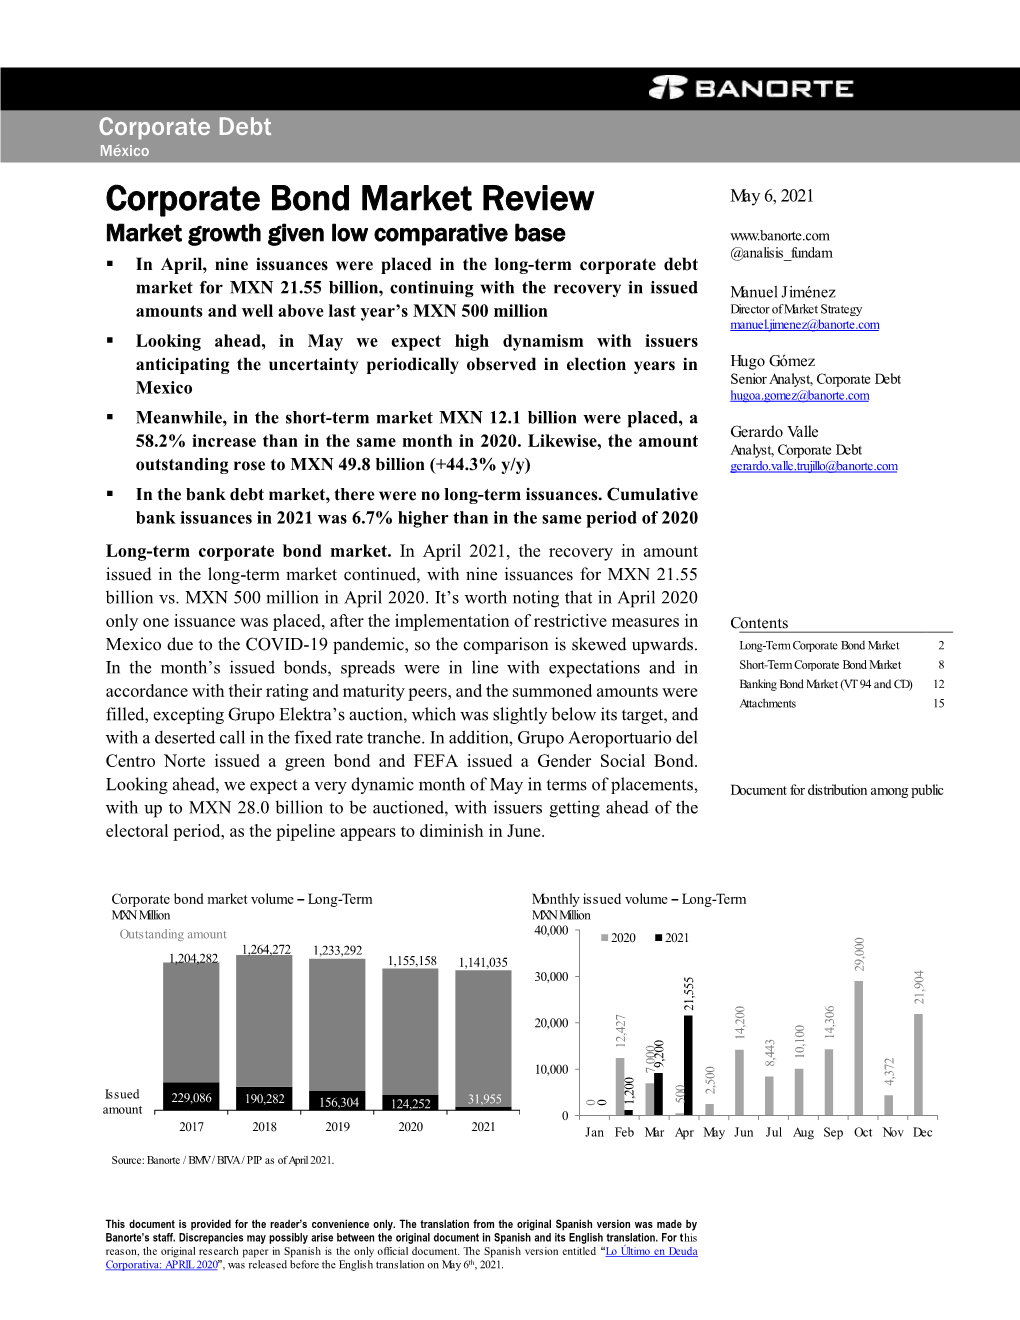 Corporate Bond Market Review May 6, 2021